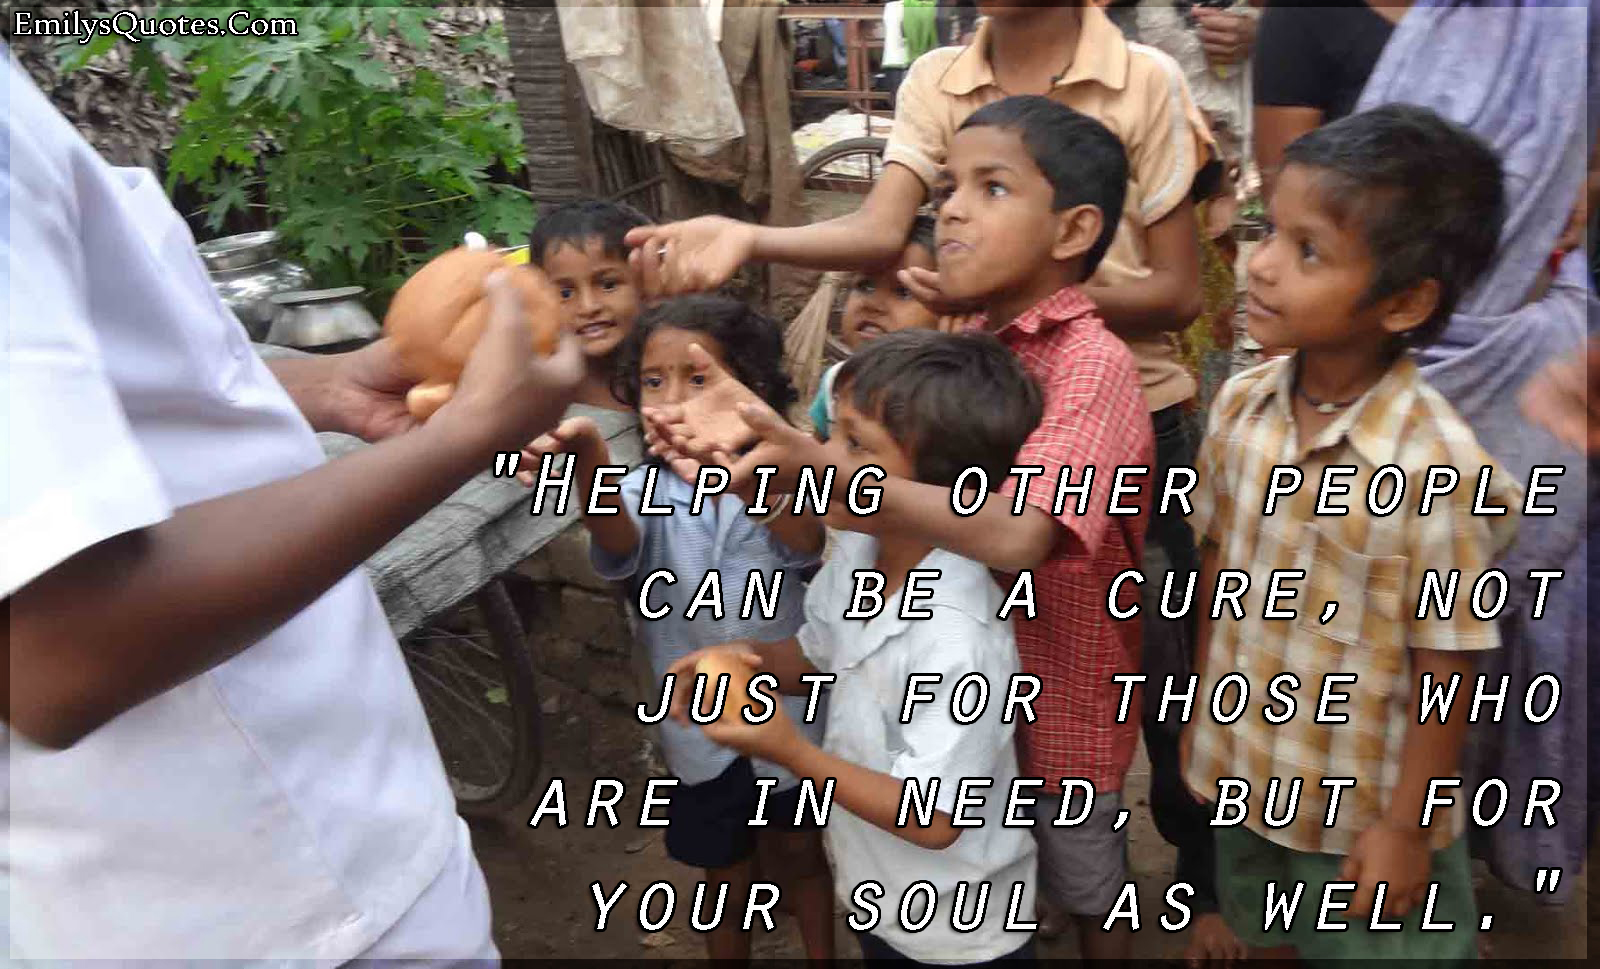 helping-people-cure-need-soul-being-a-good-person-positive